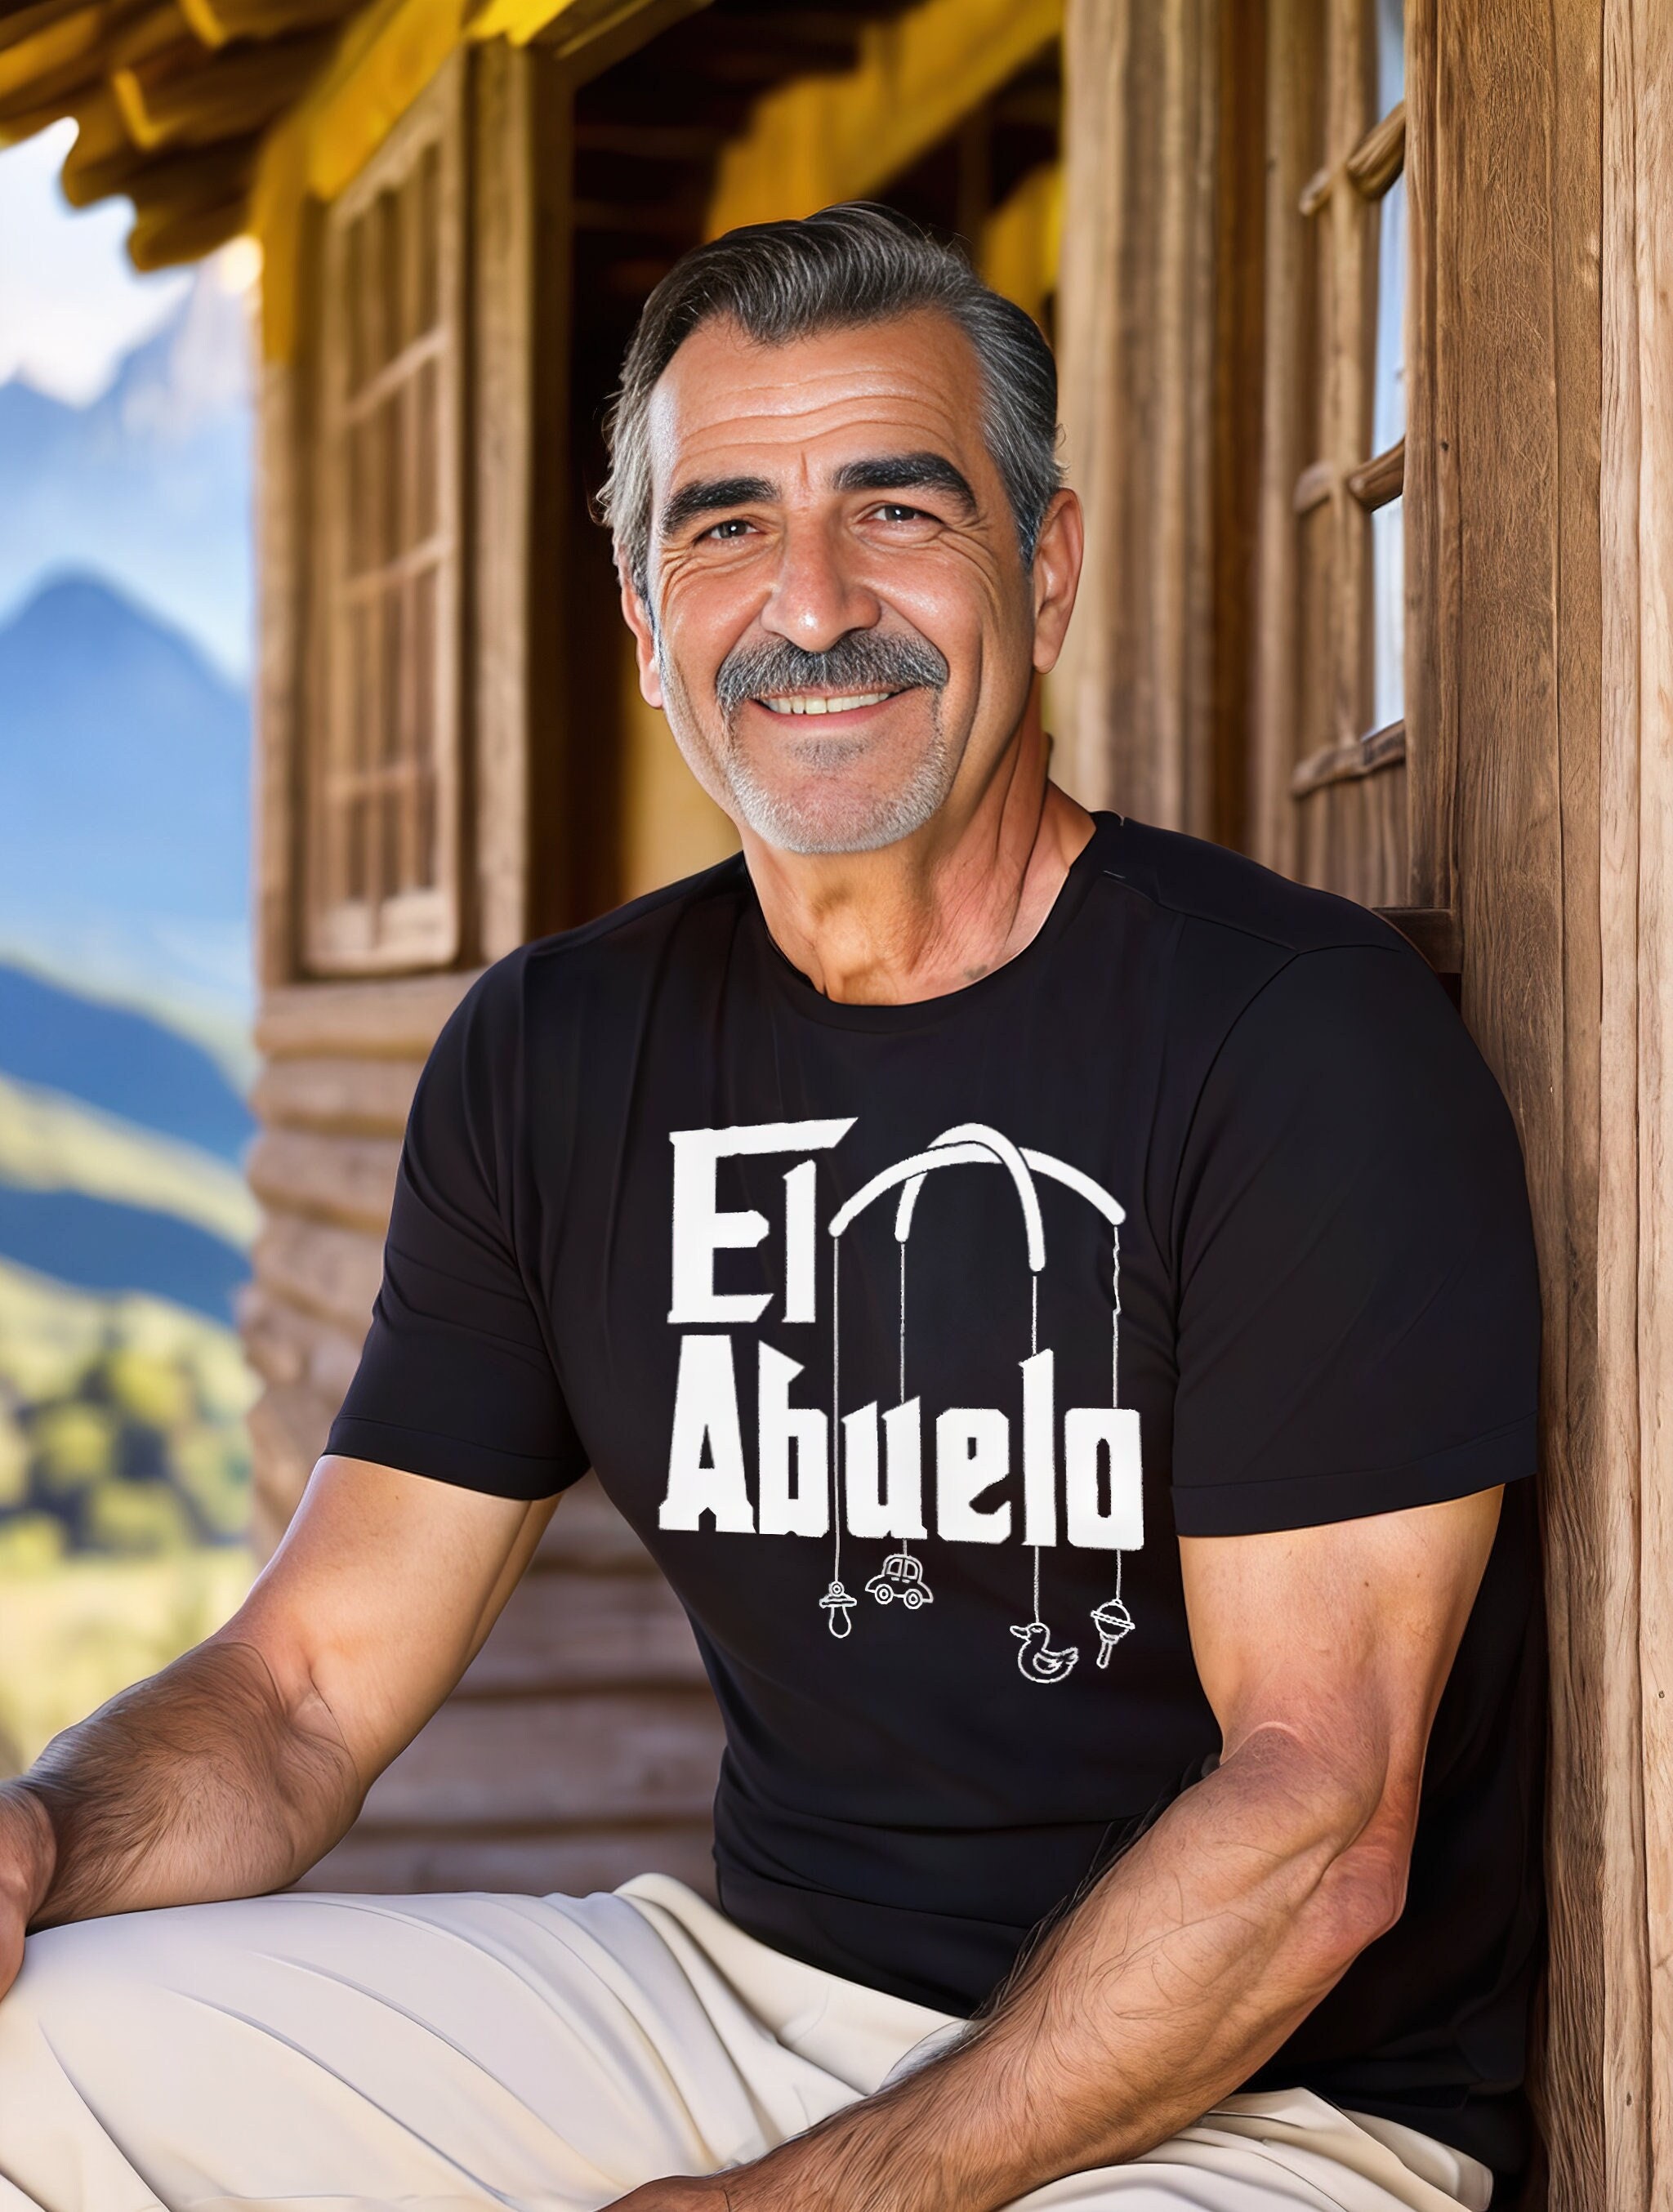 El Abuelo T-Shirt - Perfect Gift for Proud Grandfathers and First-Time Grandpas - Father's Day - Baby Annoucement - The Grandfather Shirt